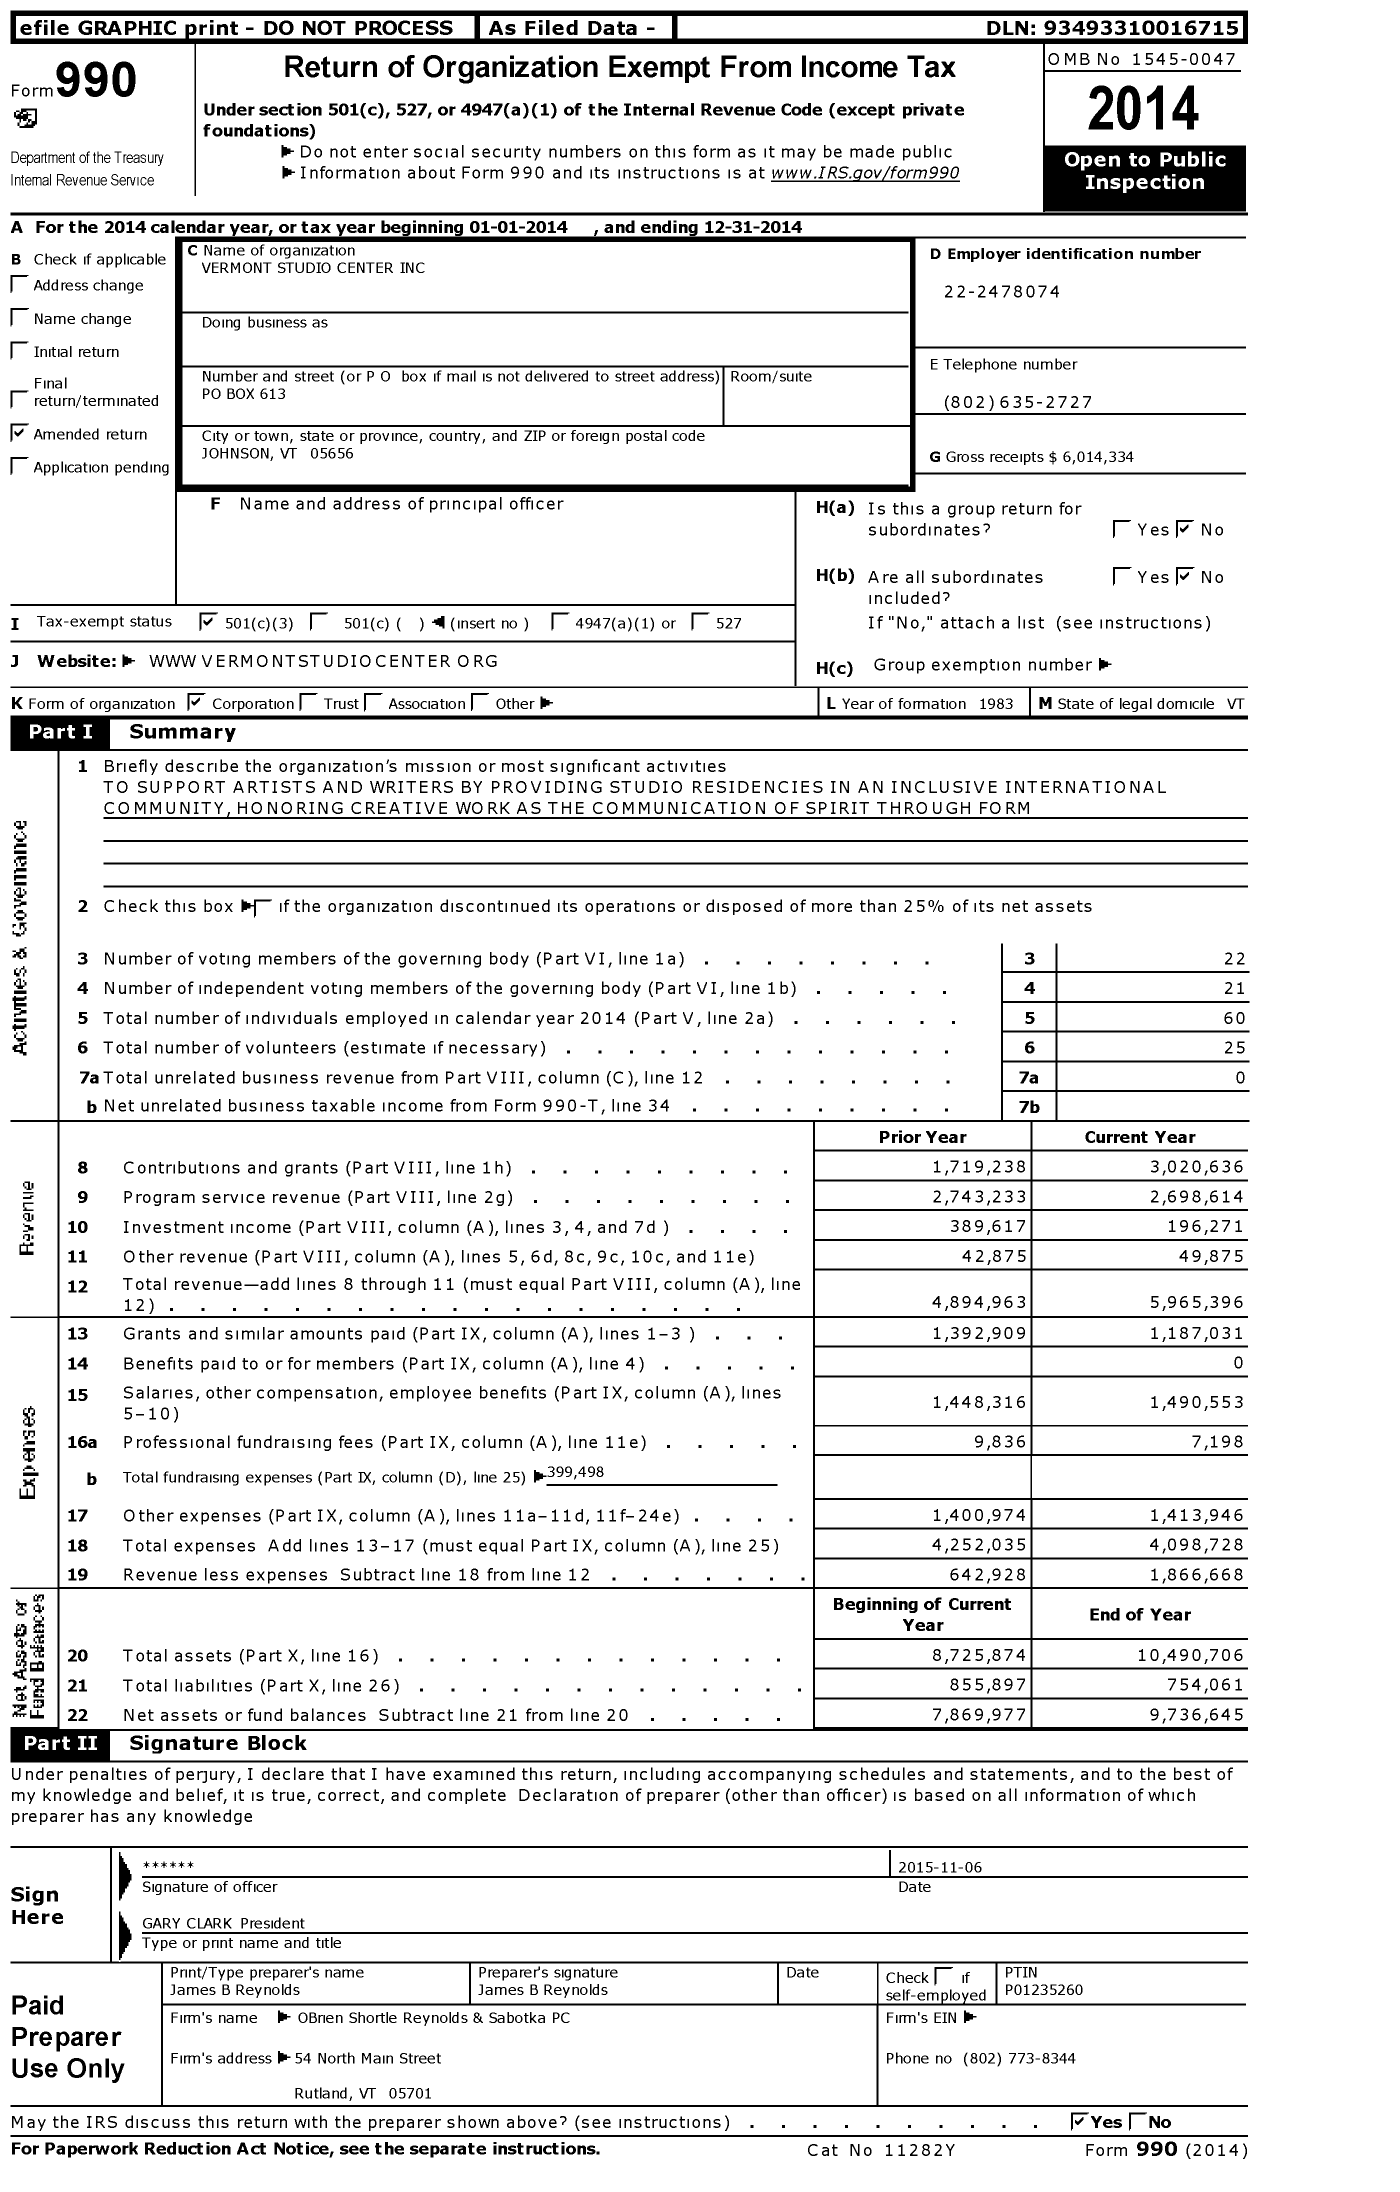 Image of first page of 2014 Form 990 for Vermont Studio Center (VSC)